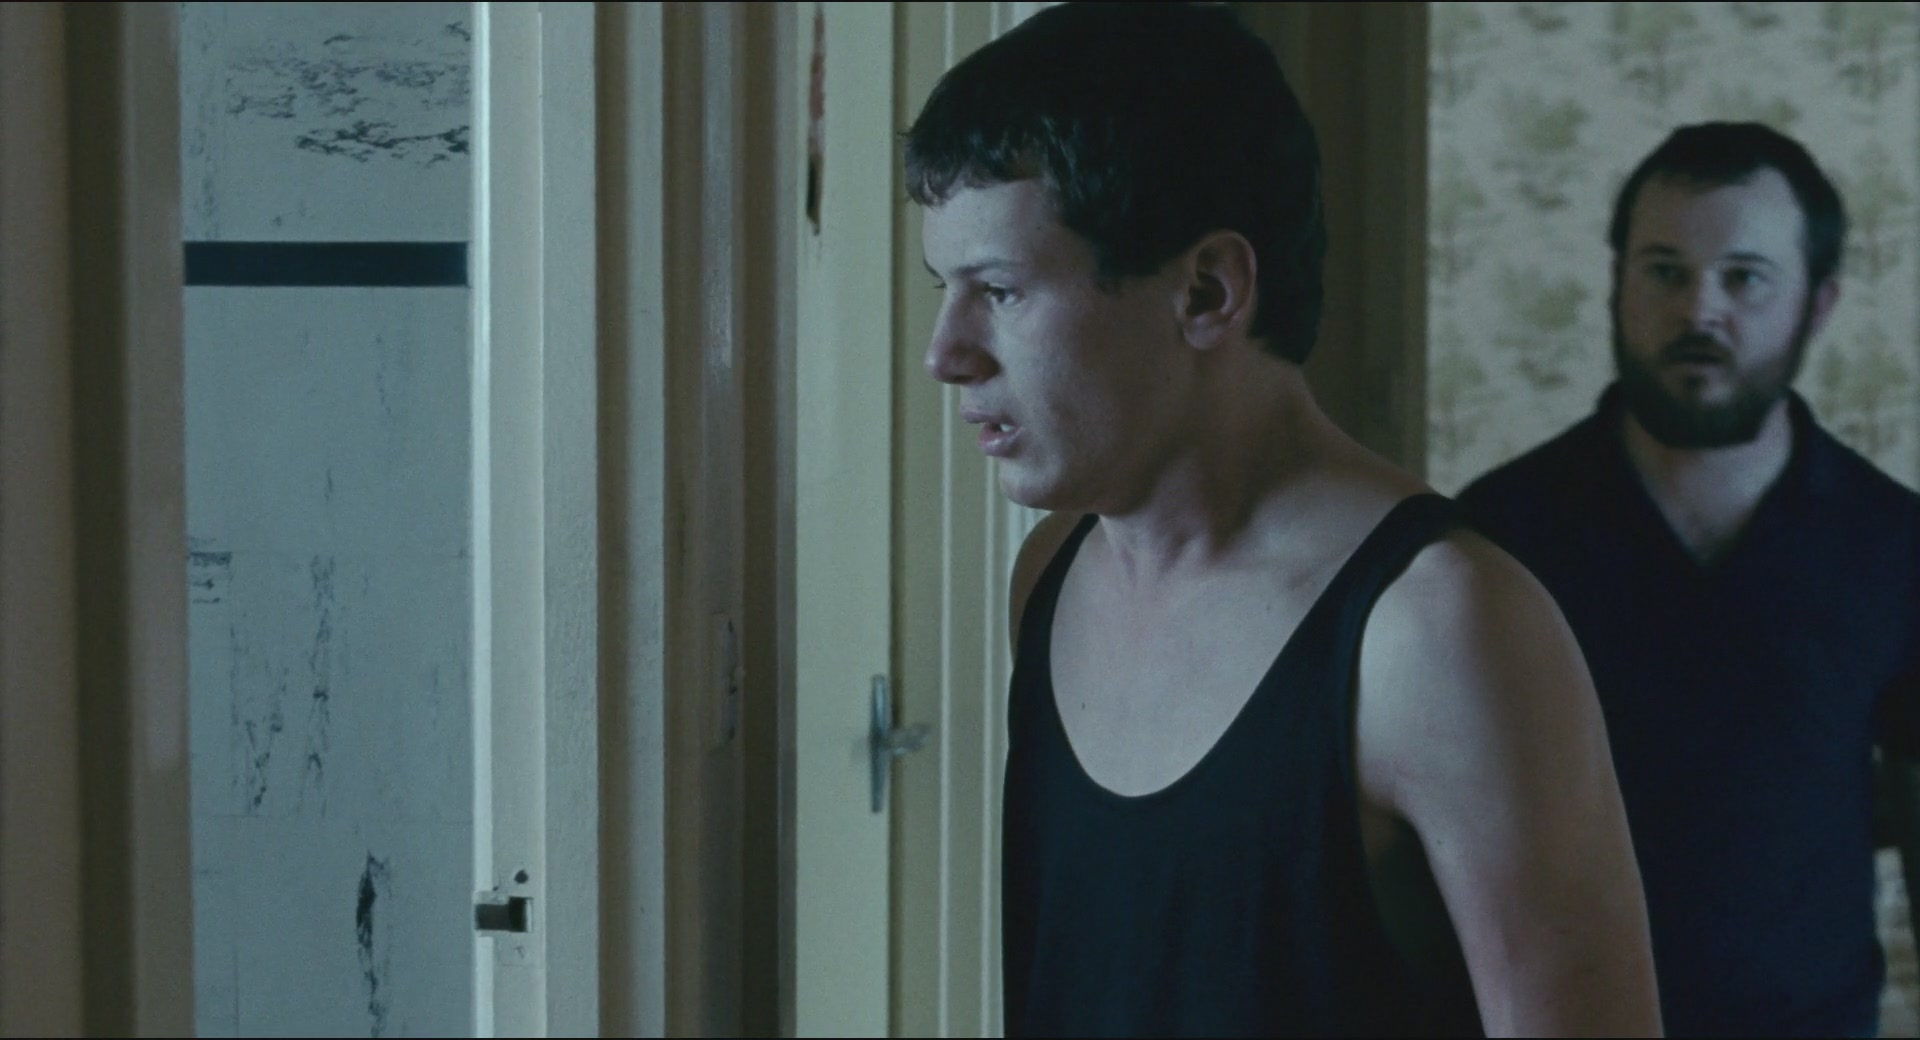 http://i946.photobucket.com/albums/ad305/Dude666MetaL/Movies%20Picz/aaf-snowtown20111080pbluray2.png